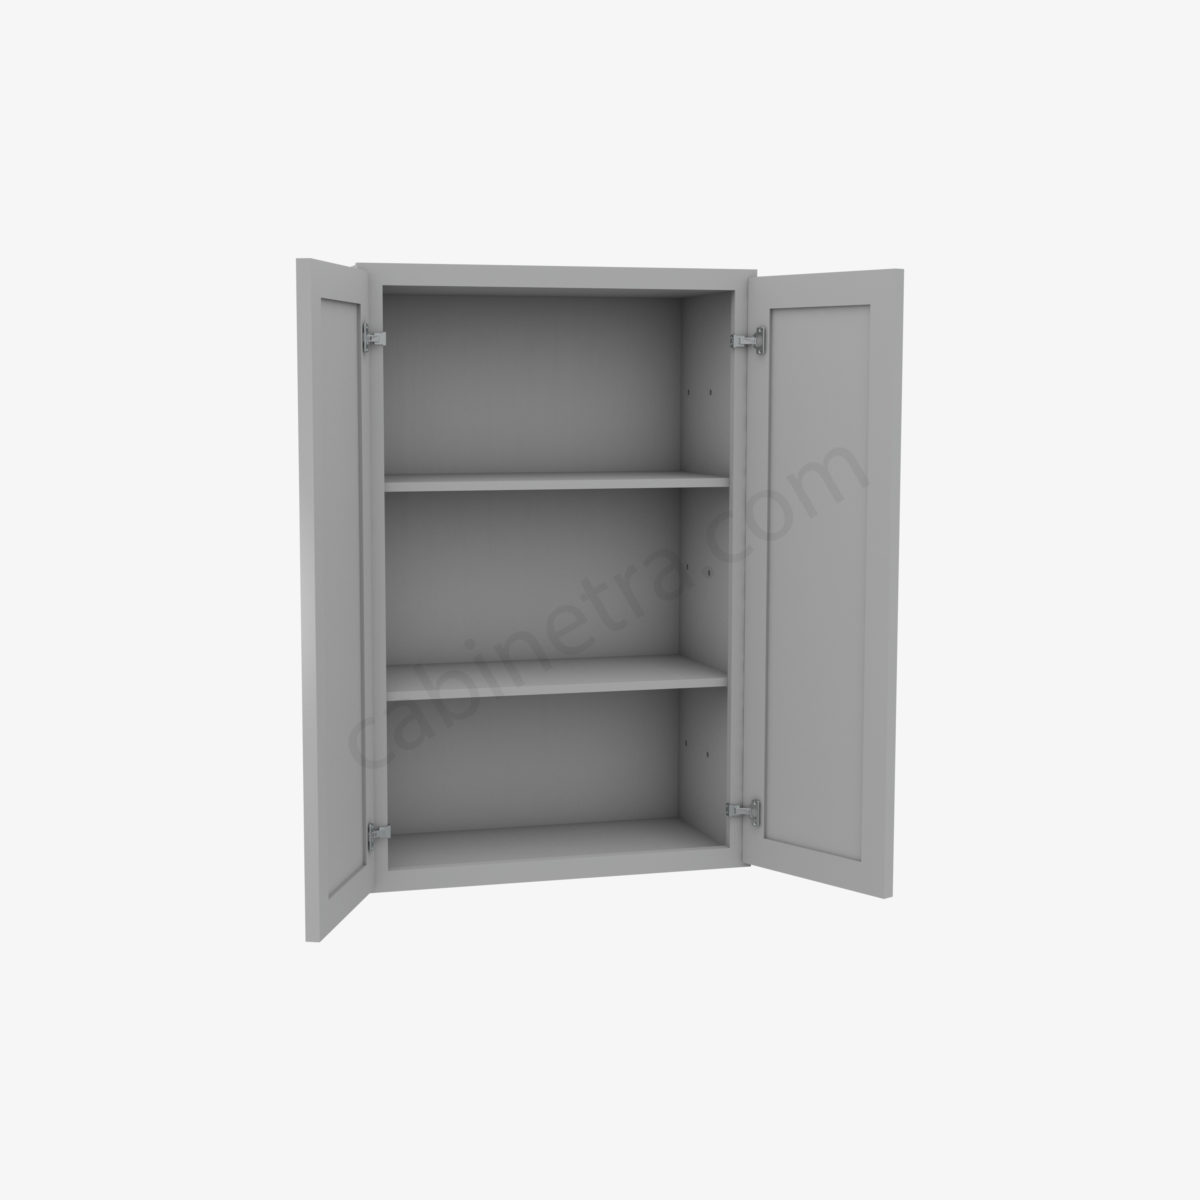 AB W2436B 1 Forevermark Lait Gray Shaker Cabinetra scaled